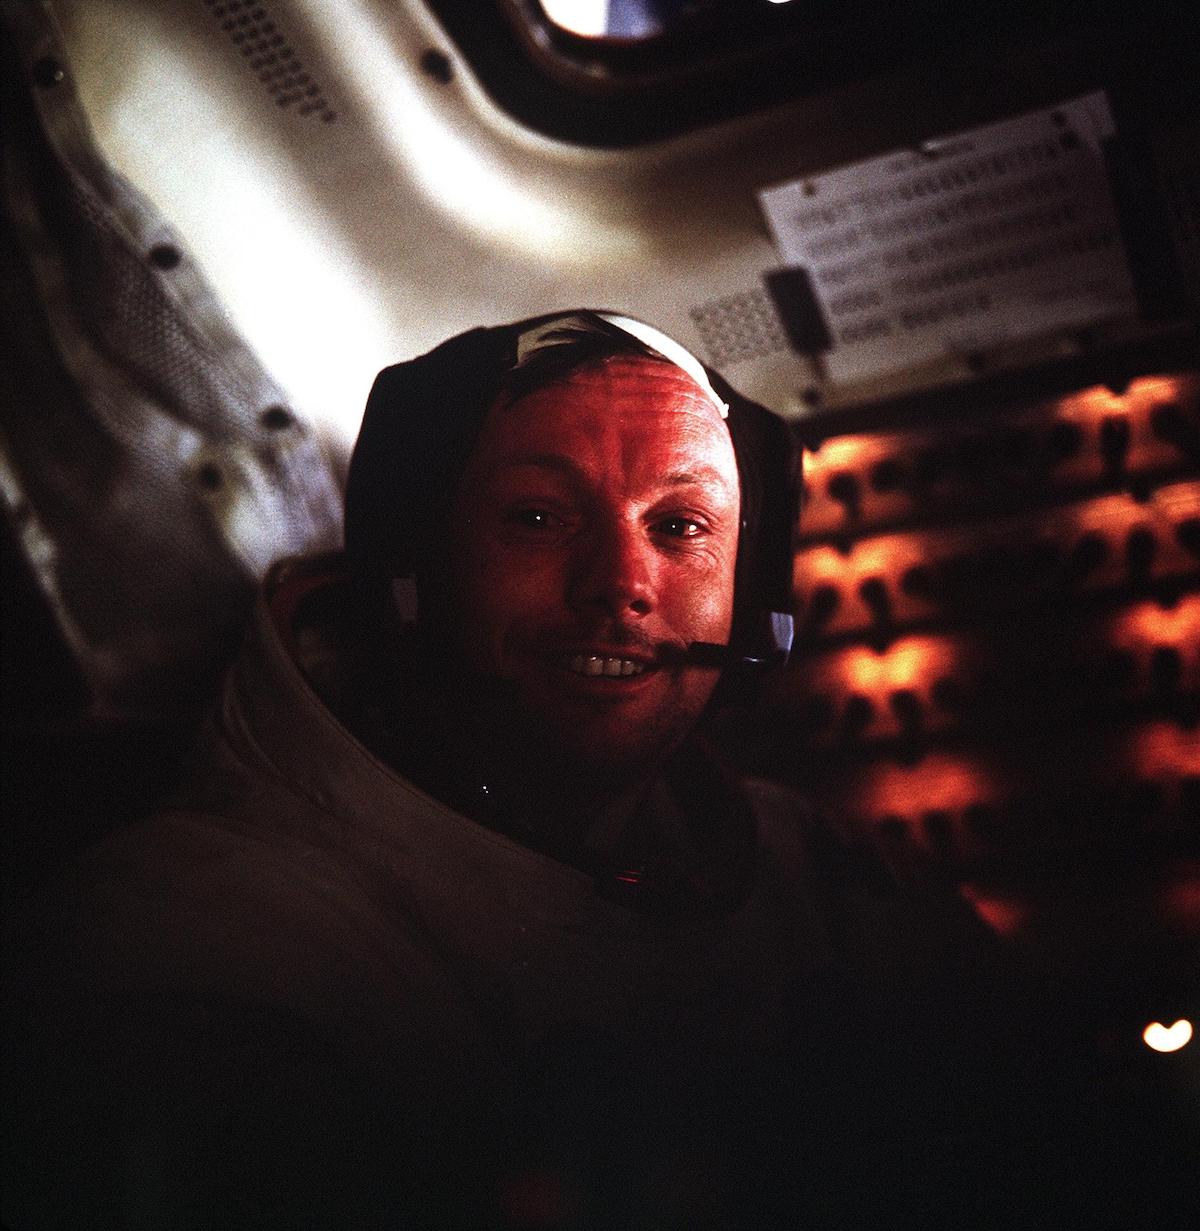 Portrait of Neil Armstrong